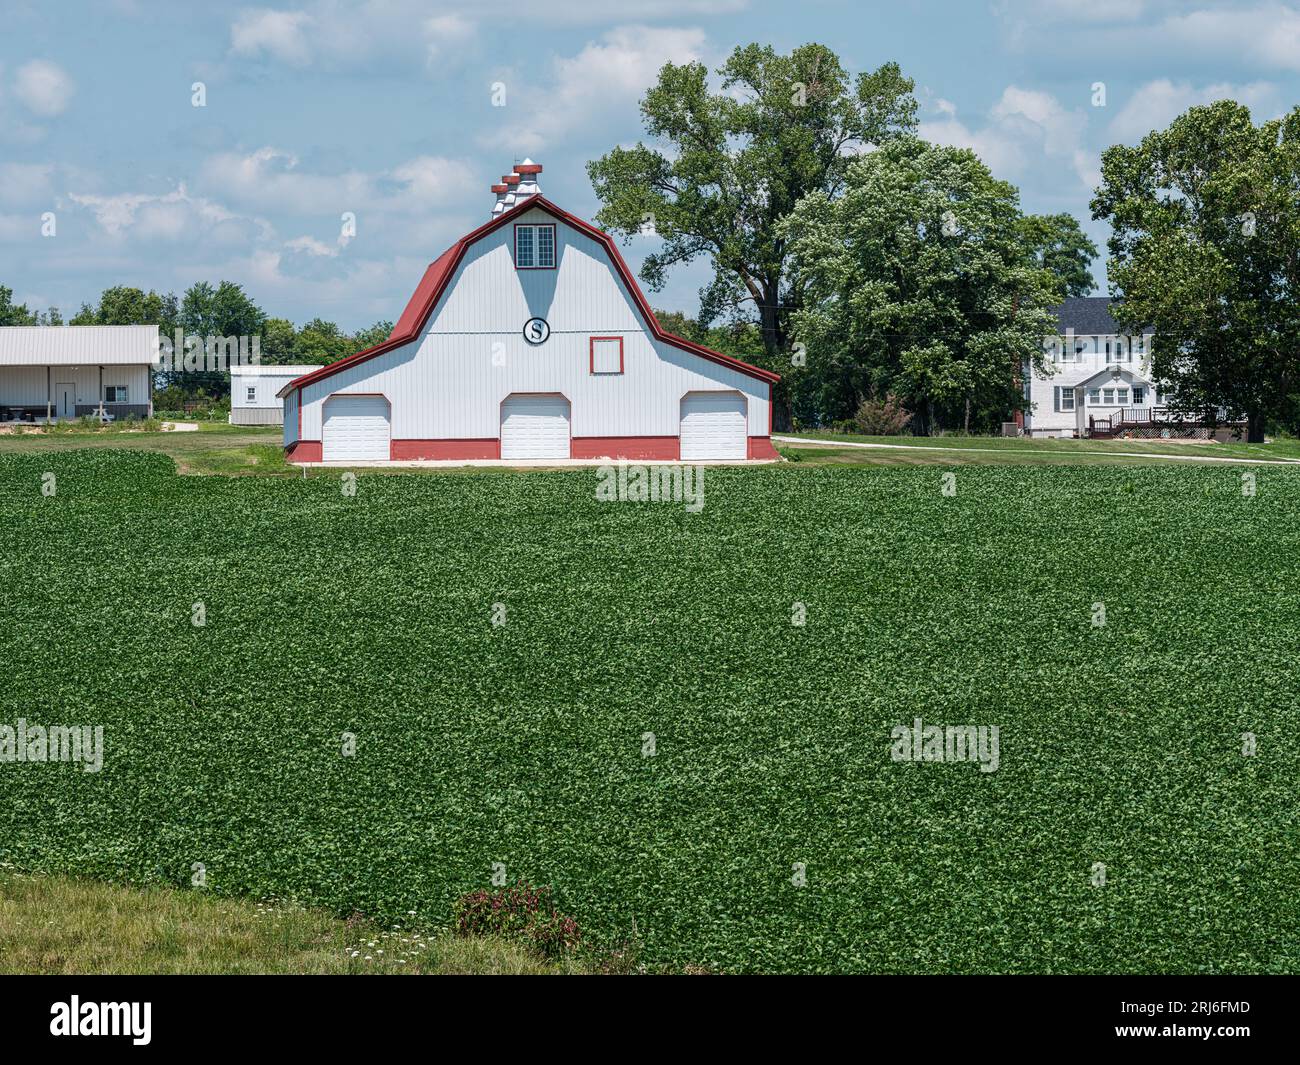 Midsummer agricultural field bursting with greens with stylish farmhouse and barn in Missouri Stock Photo